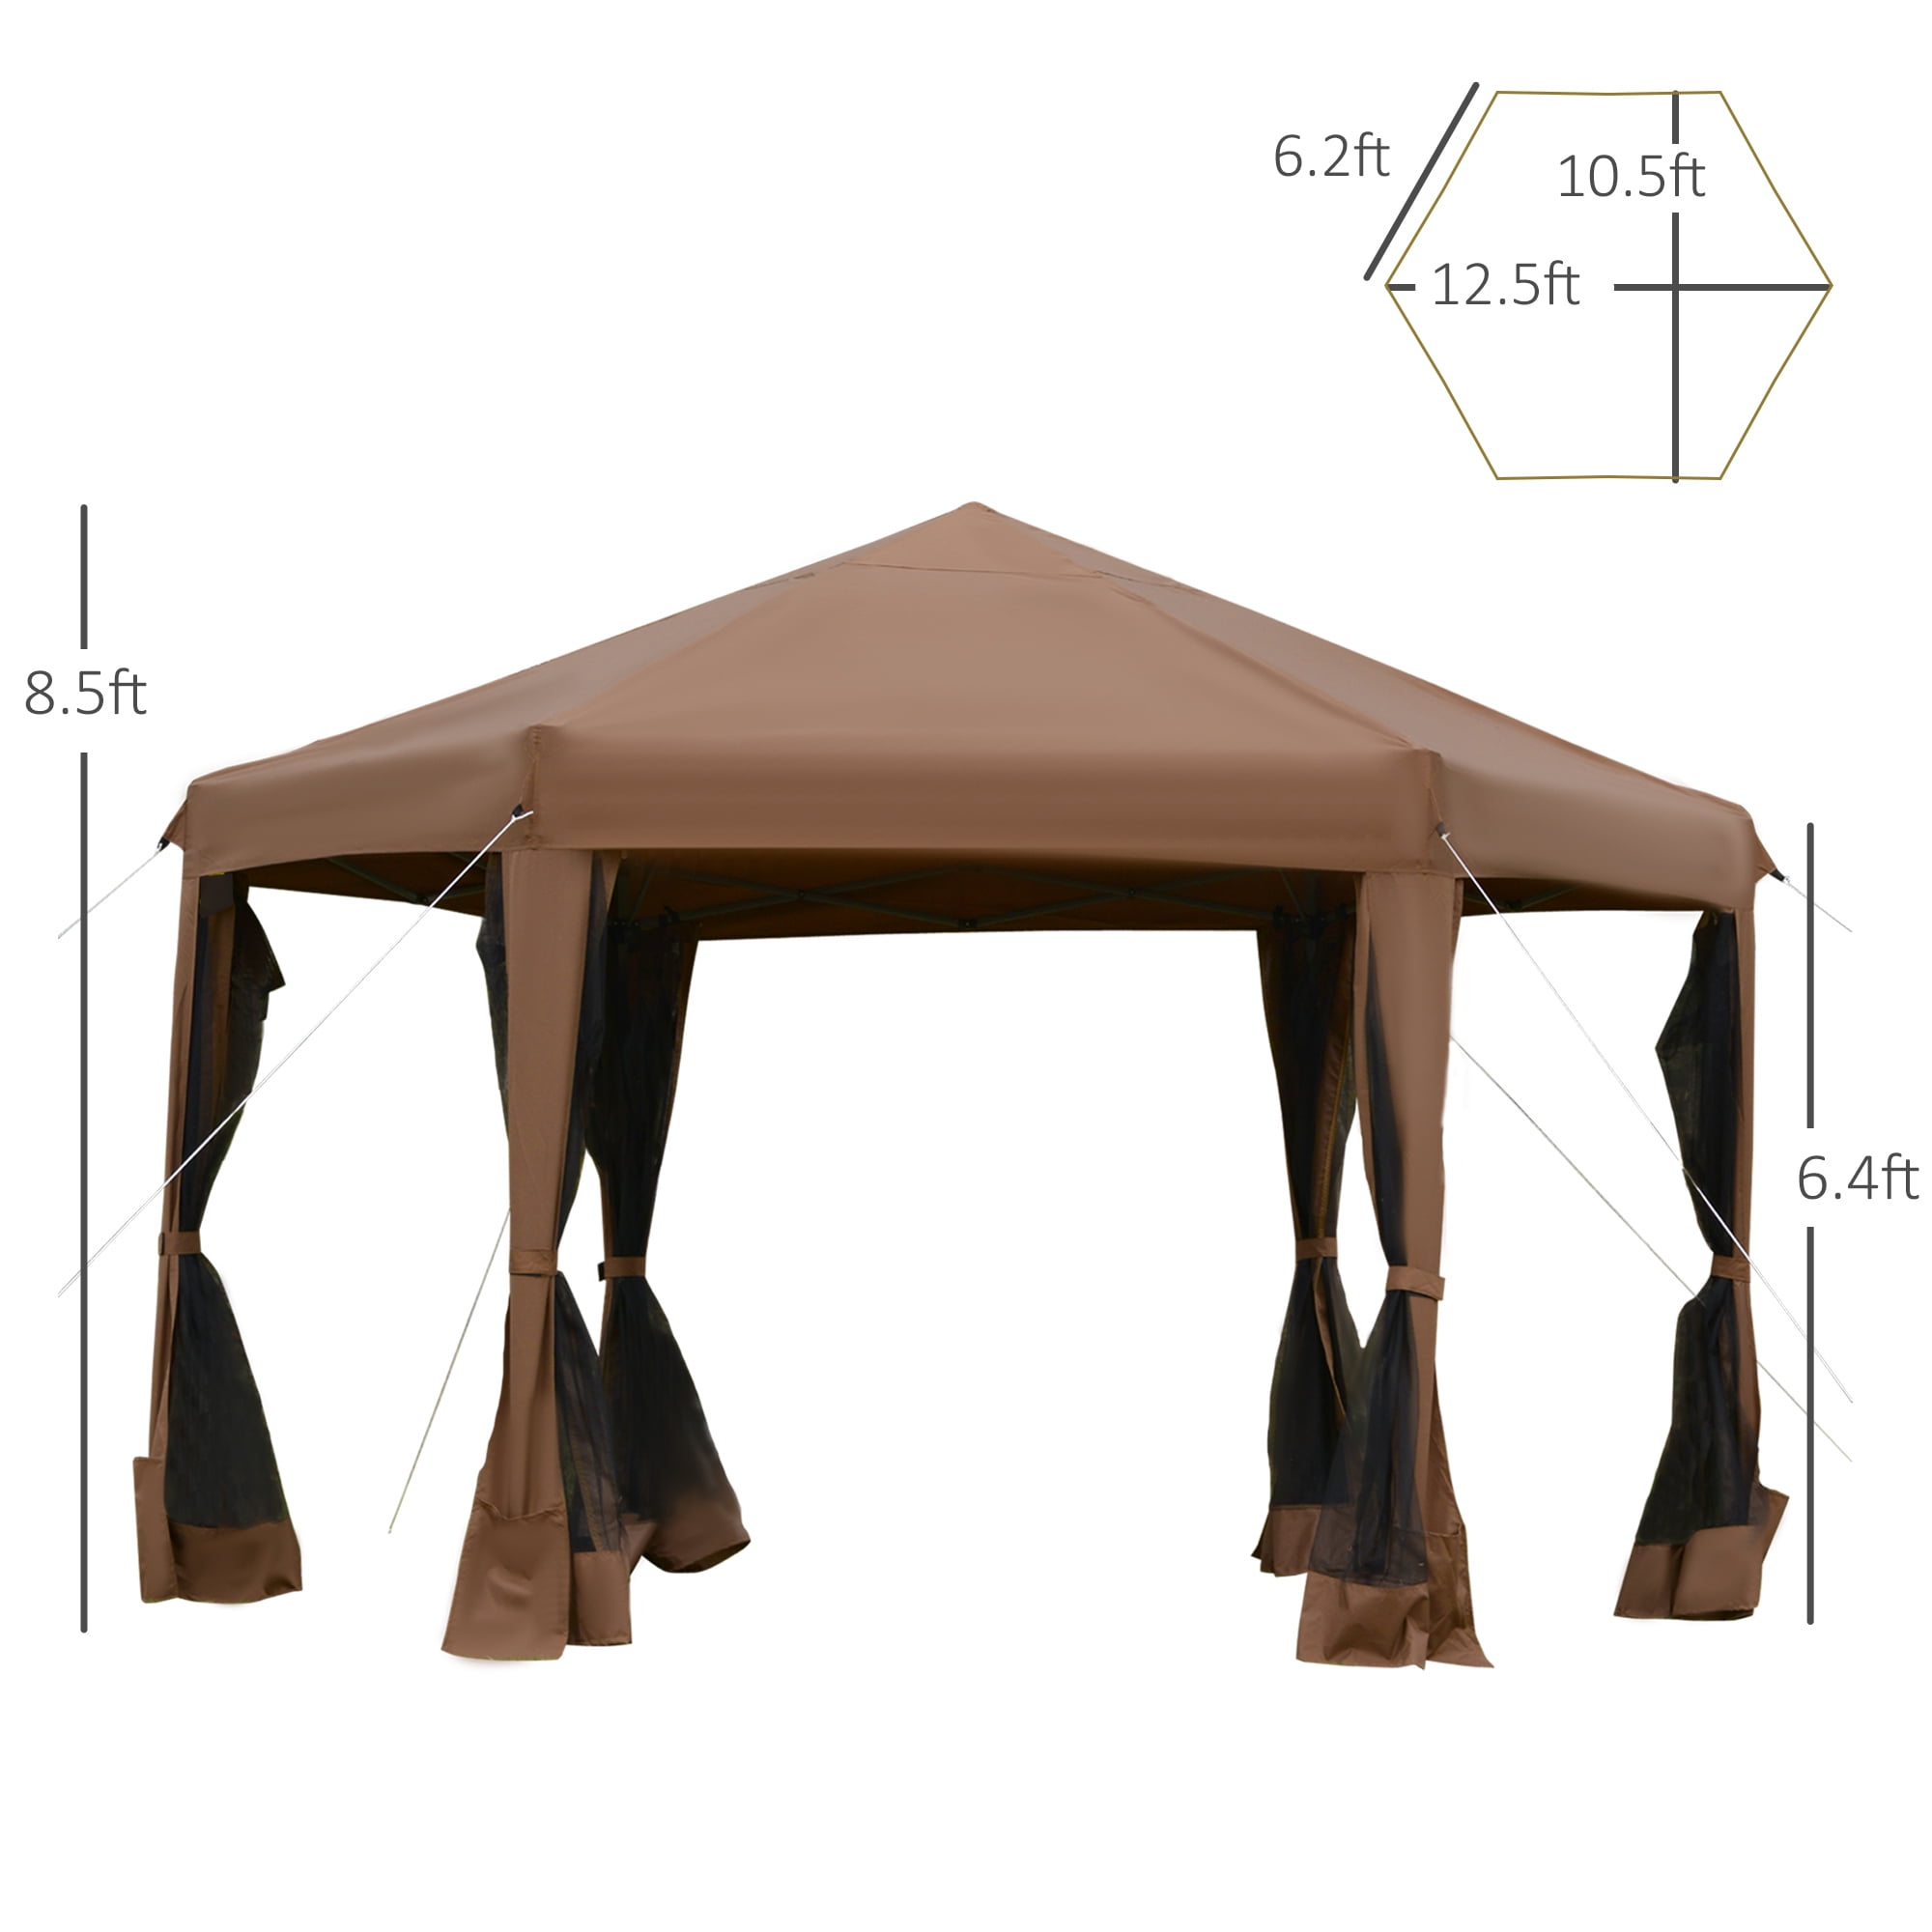 Outsunny 12.5' Pop Up Gazebo Hexagonal Canopy Tent Outdoor Shelter Pavilion Sun Protection with Mesh Sidewalls Handy Bag Dark Brown 